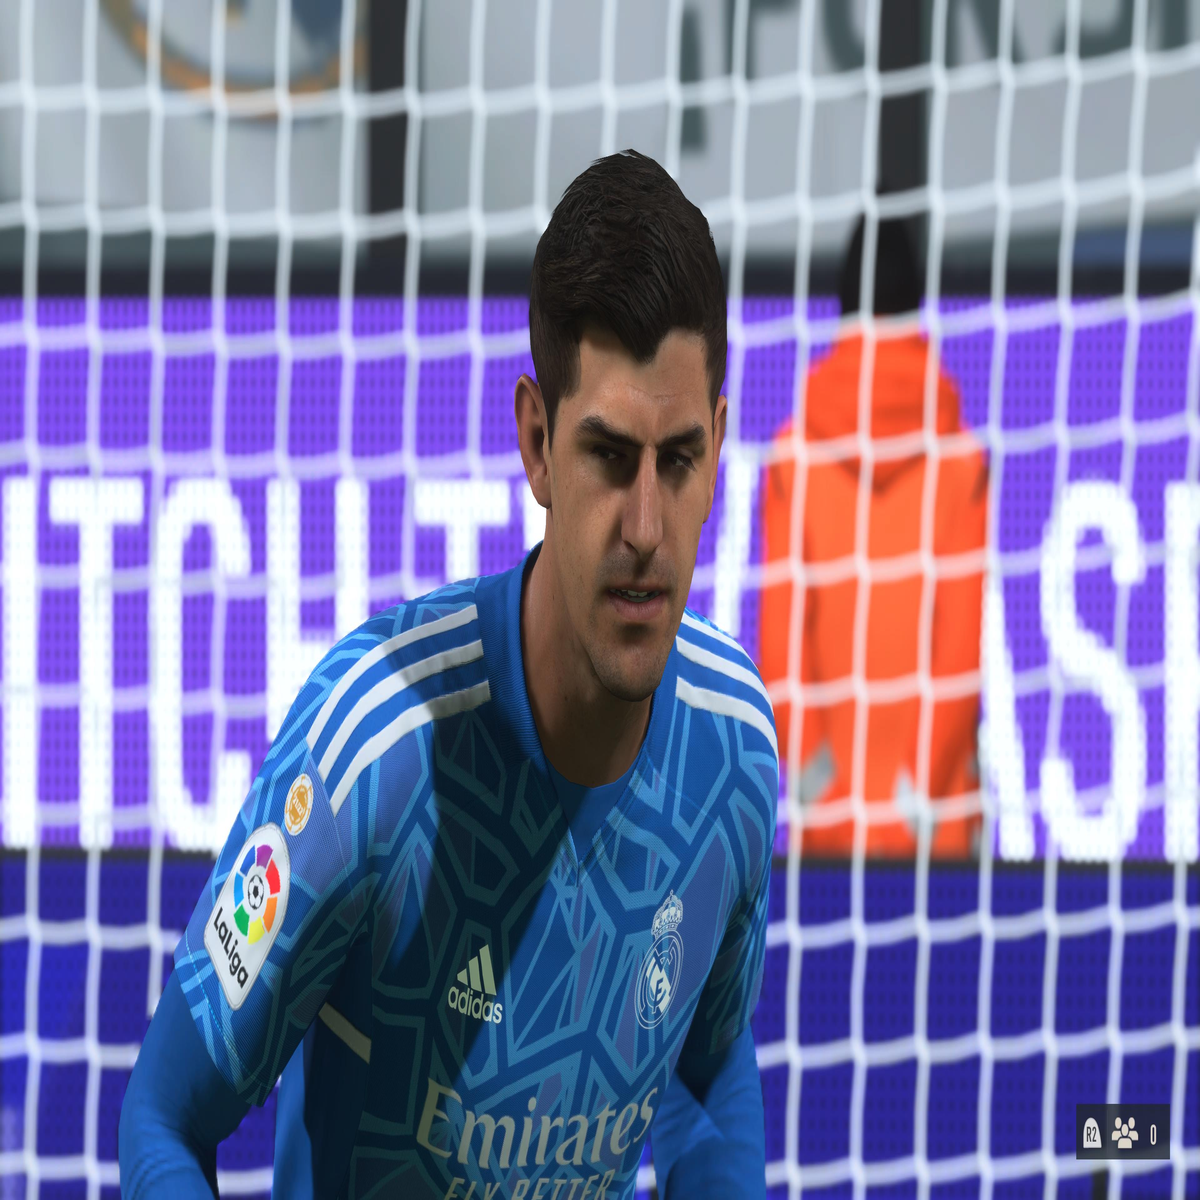 New FIFA 19 objective says every player must be a goalkeeper - and